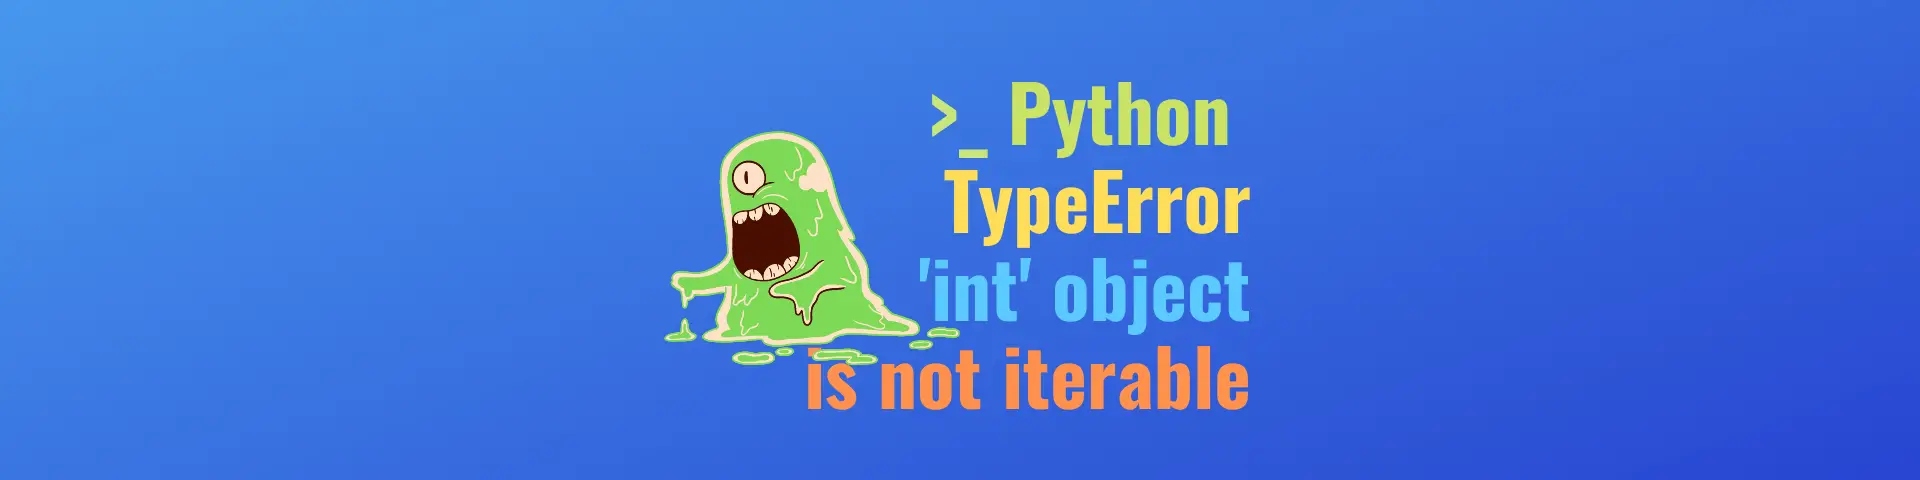 Python TypeError: 'int' object is not iterable